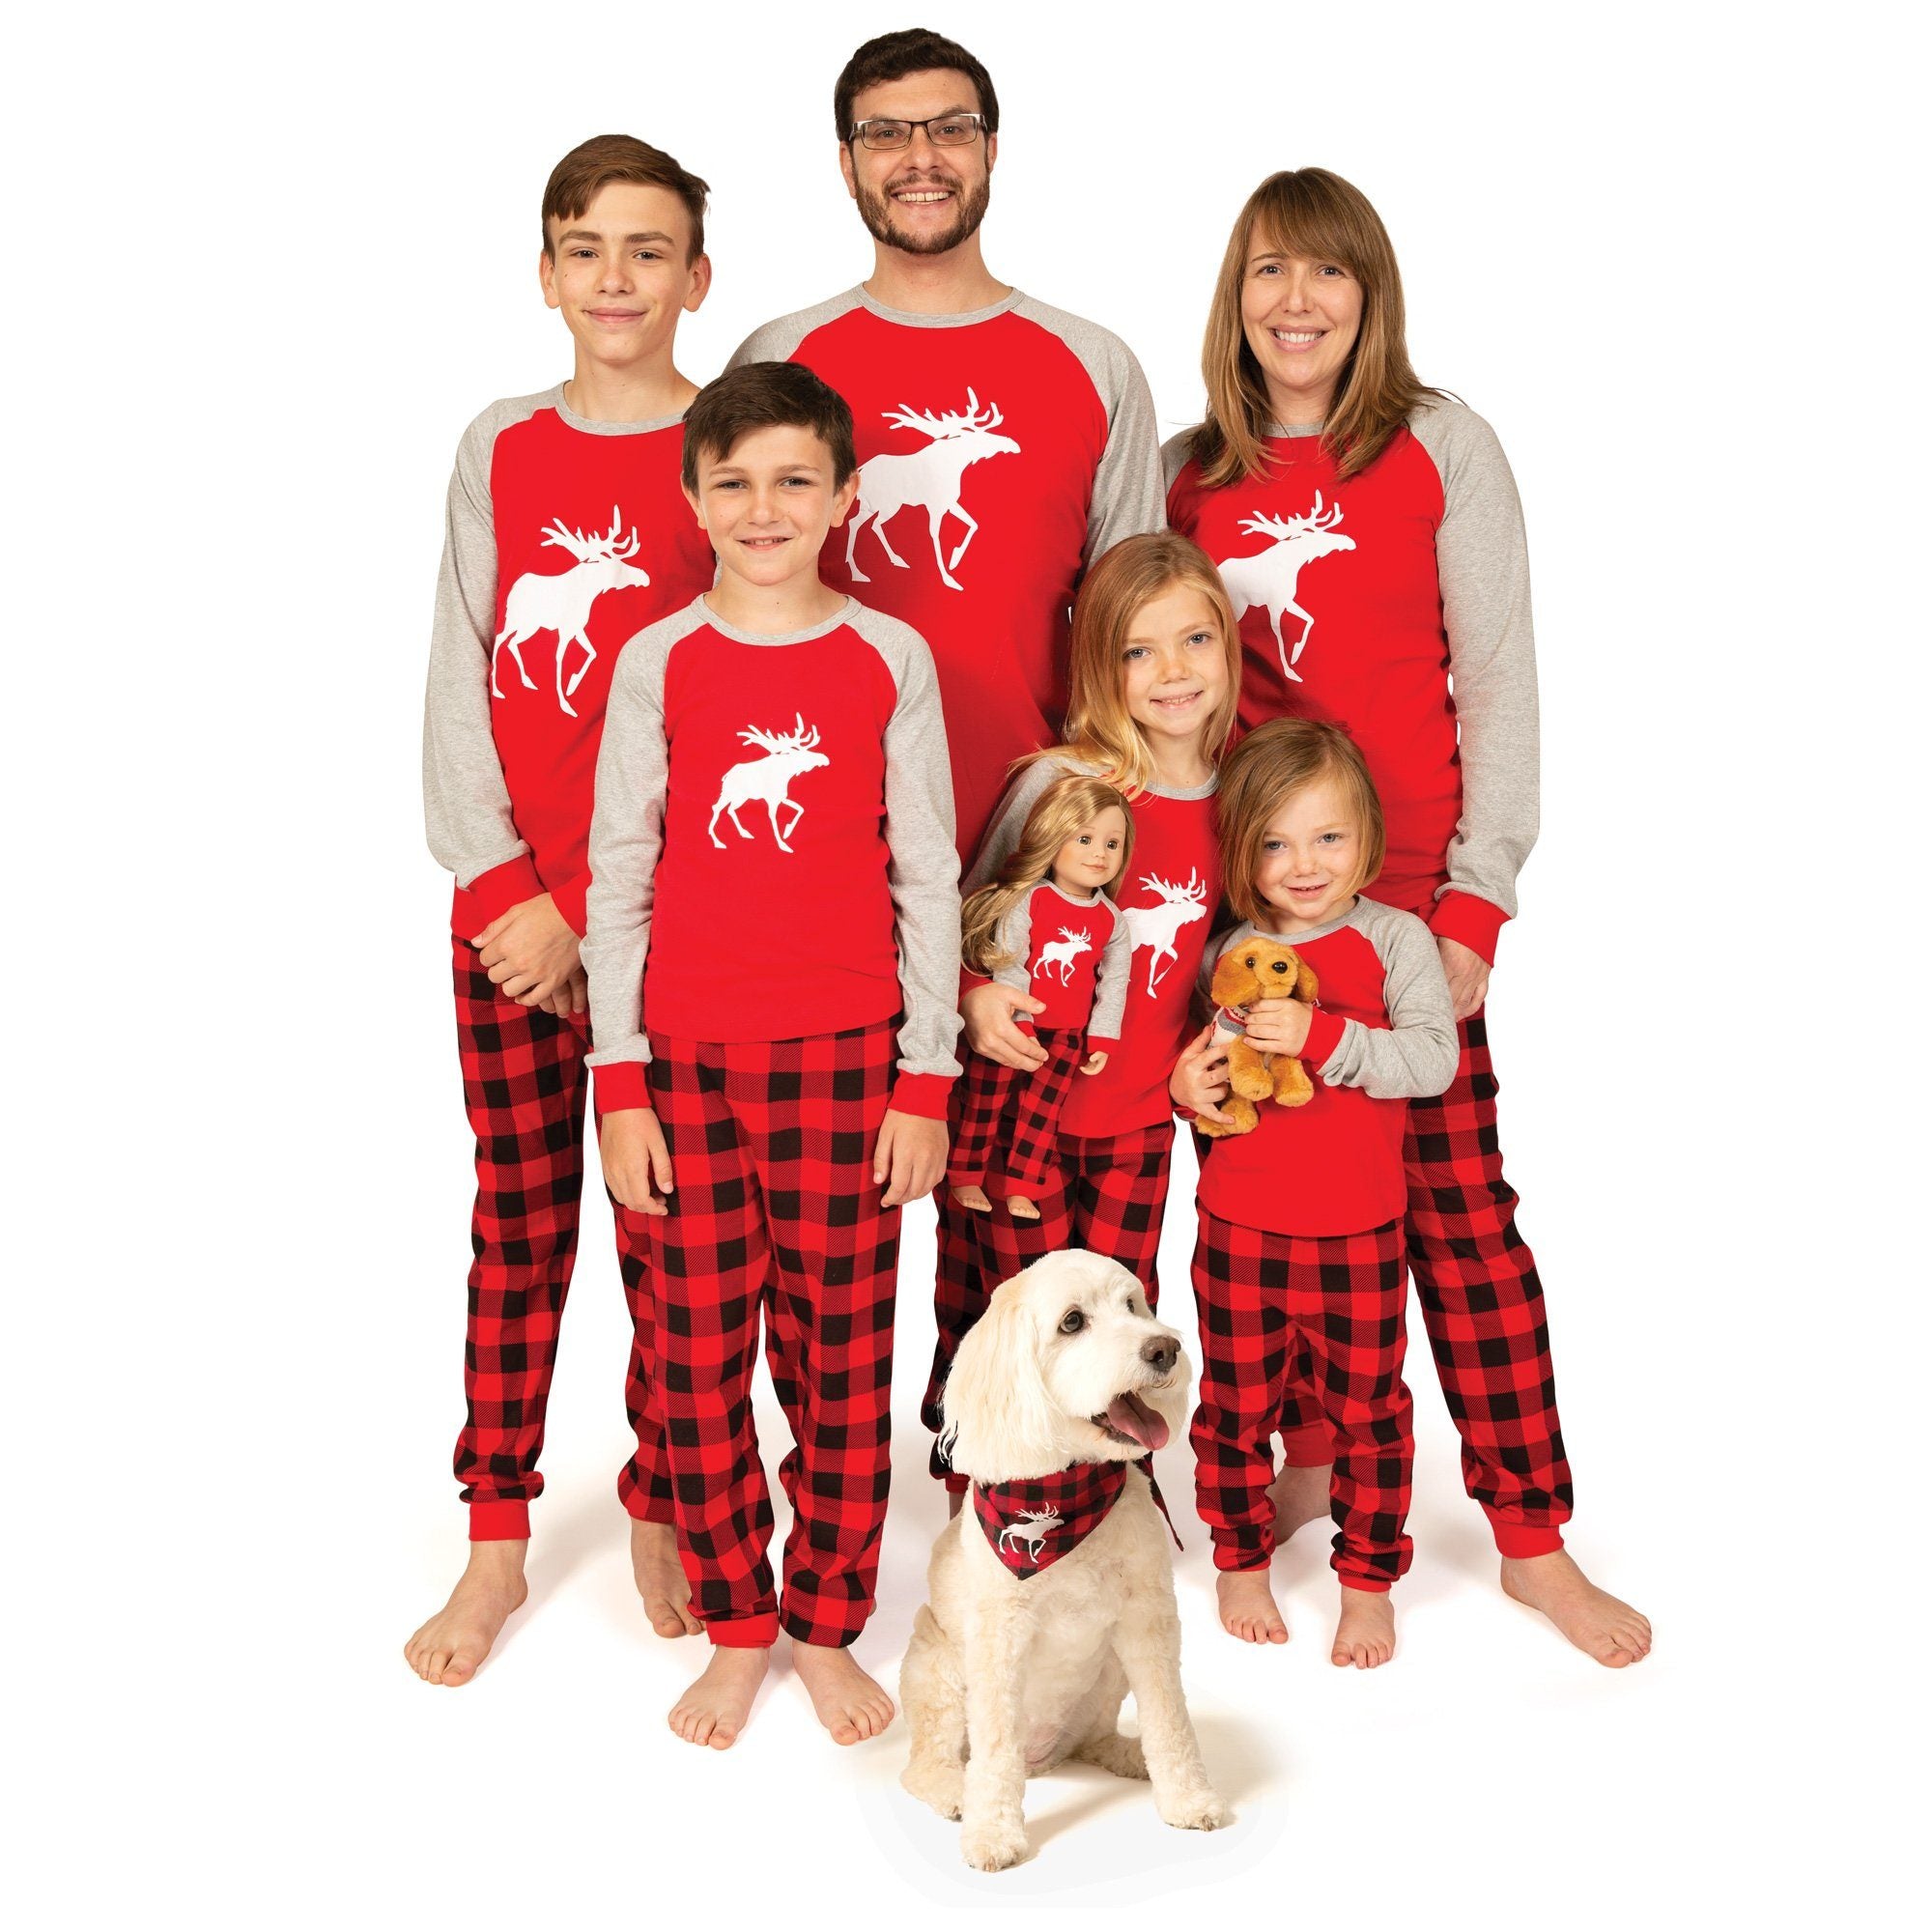 Matching red and black plaid pajamas for the whole family-adults, kids, doll and dog